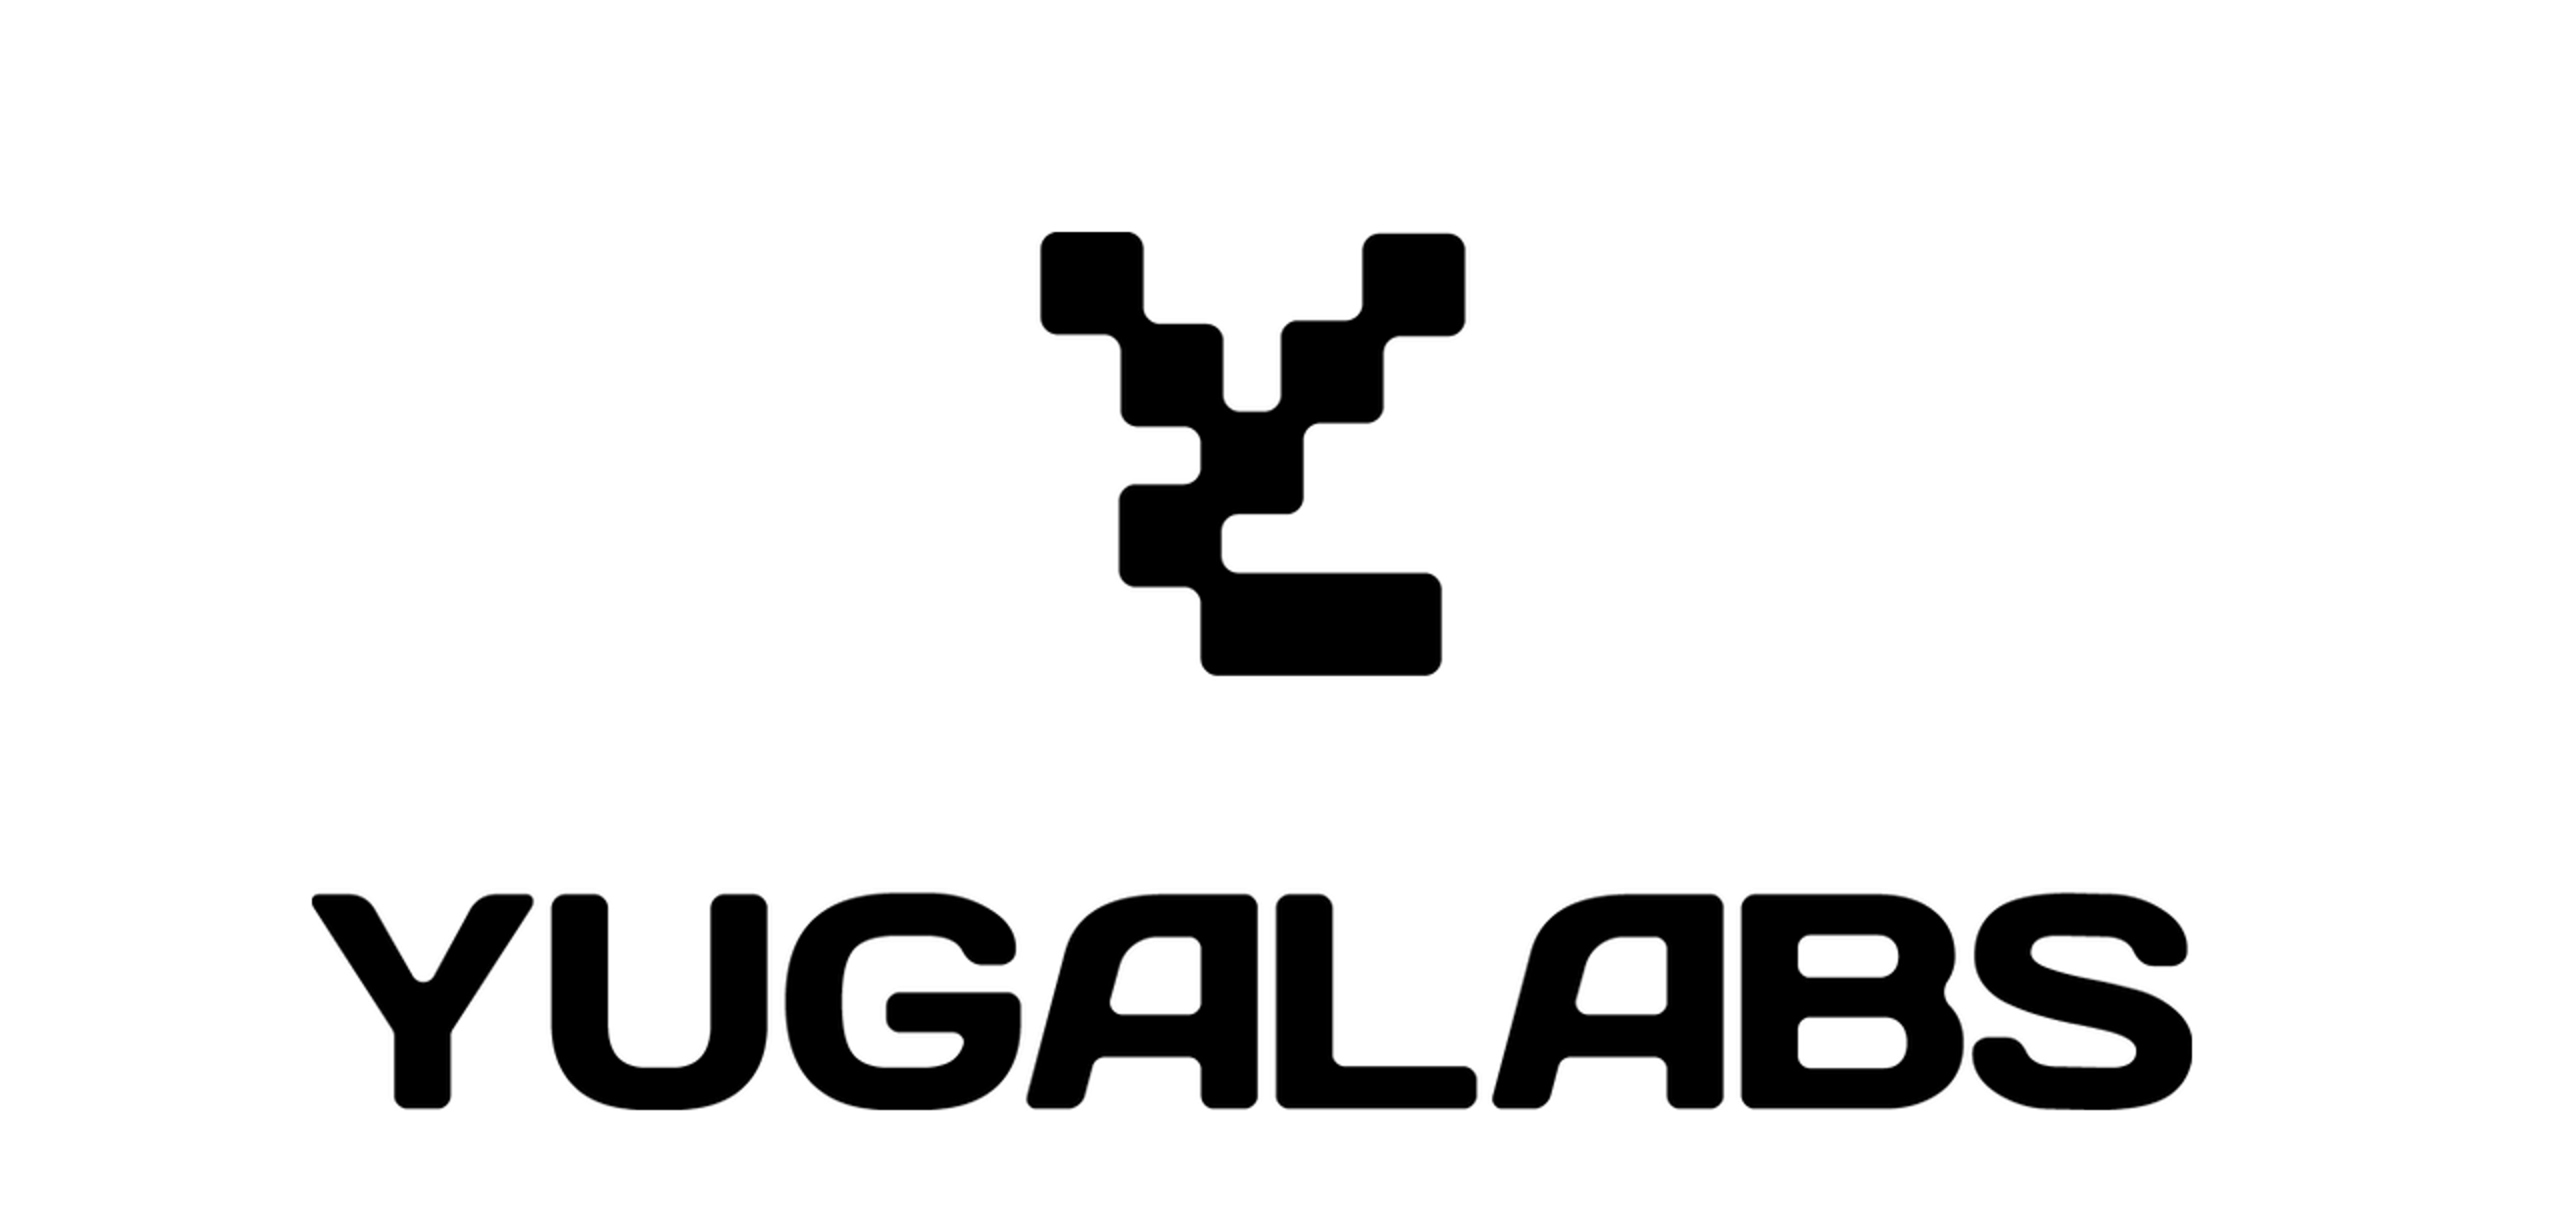 Bored Ape Yacht Club Parent Yuga Labs Could Be Worth $5B: Report